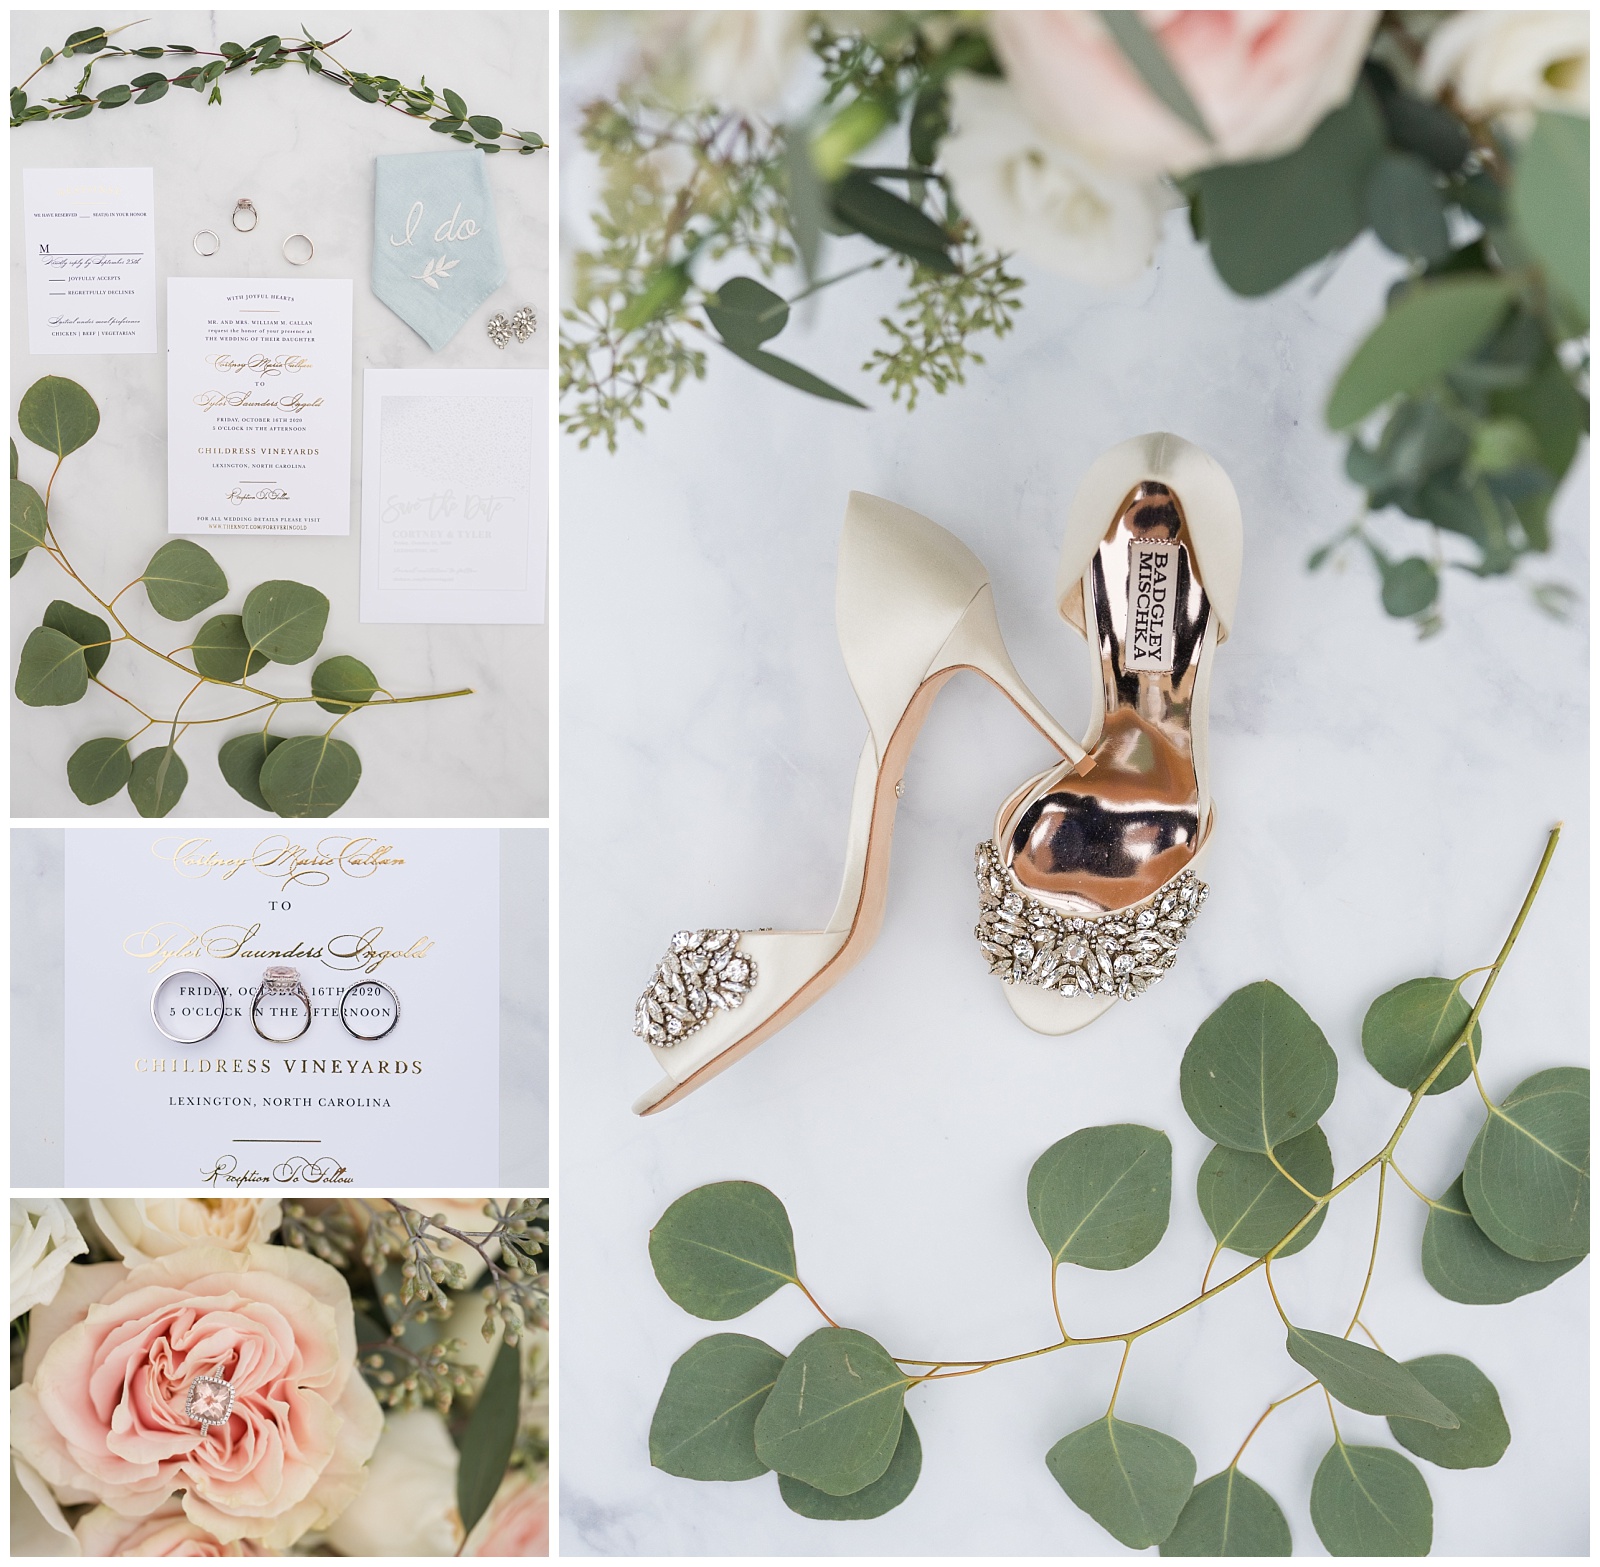 badgley mischka wedding heels, wedding rings, invitations, and other details including lots of greenery, blush, and rose gold accents at the Childress Vineyards Wedding venue